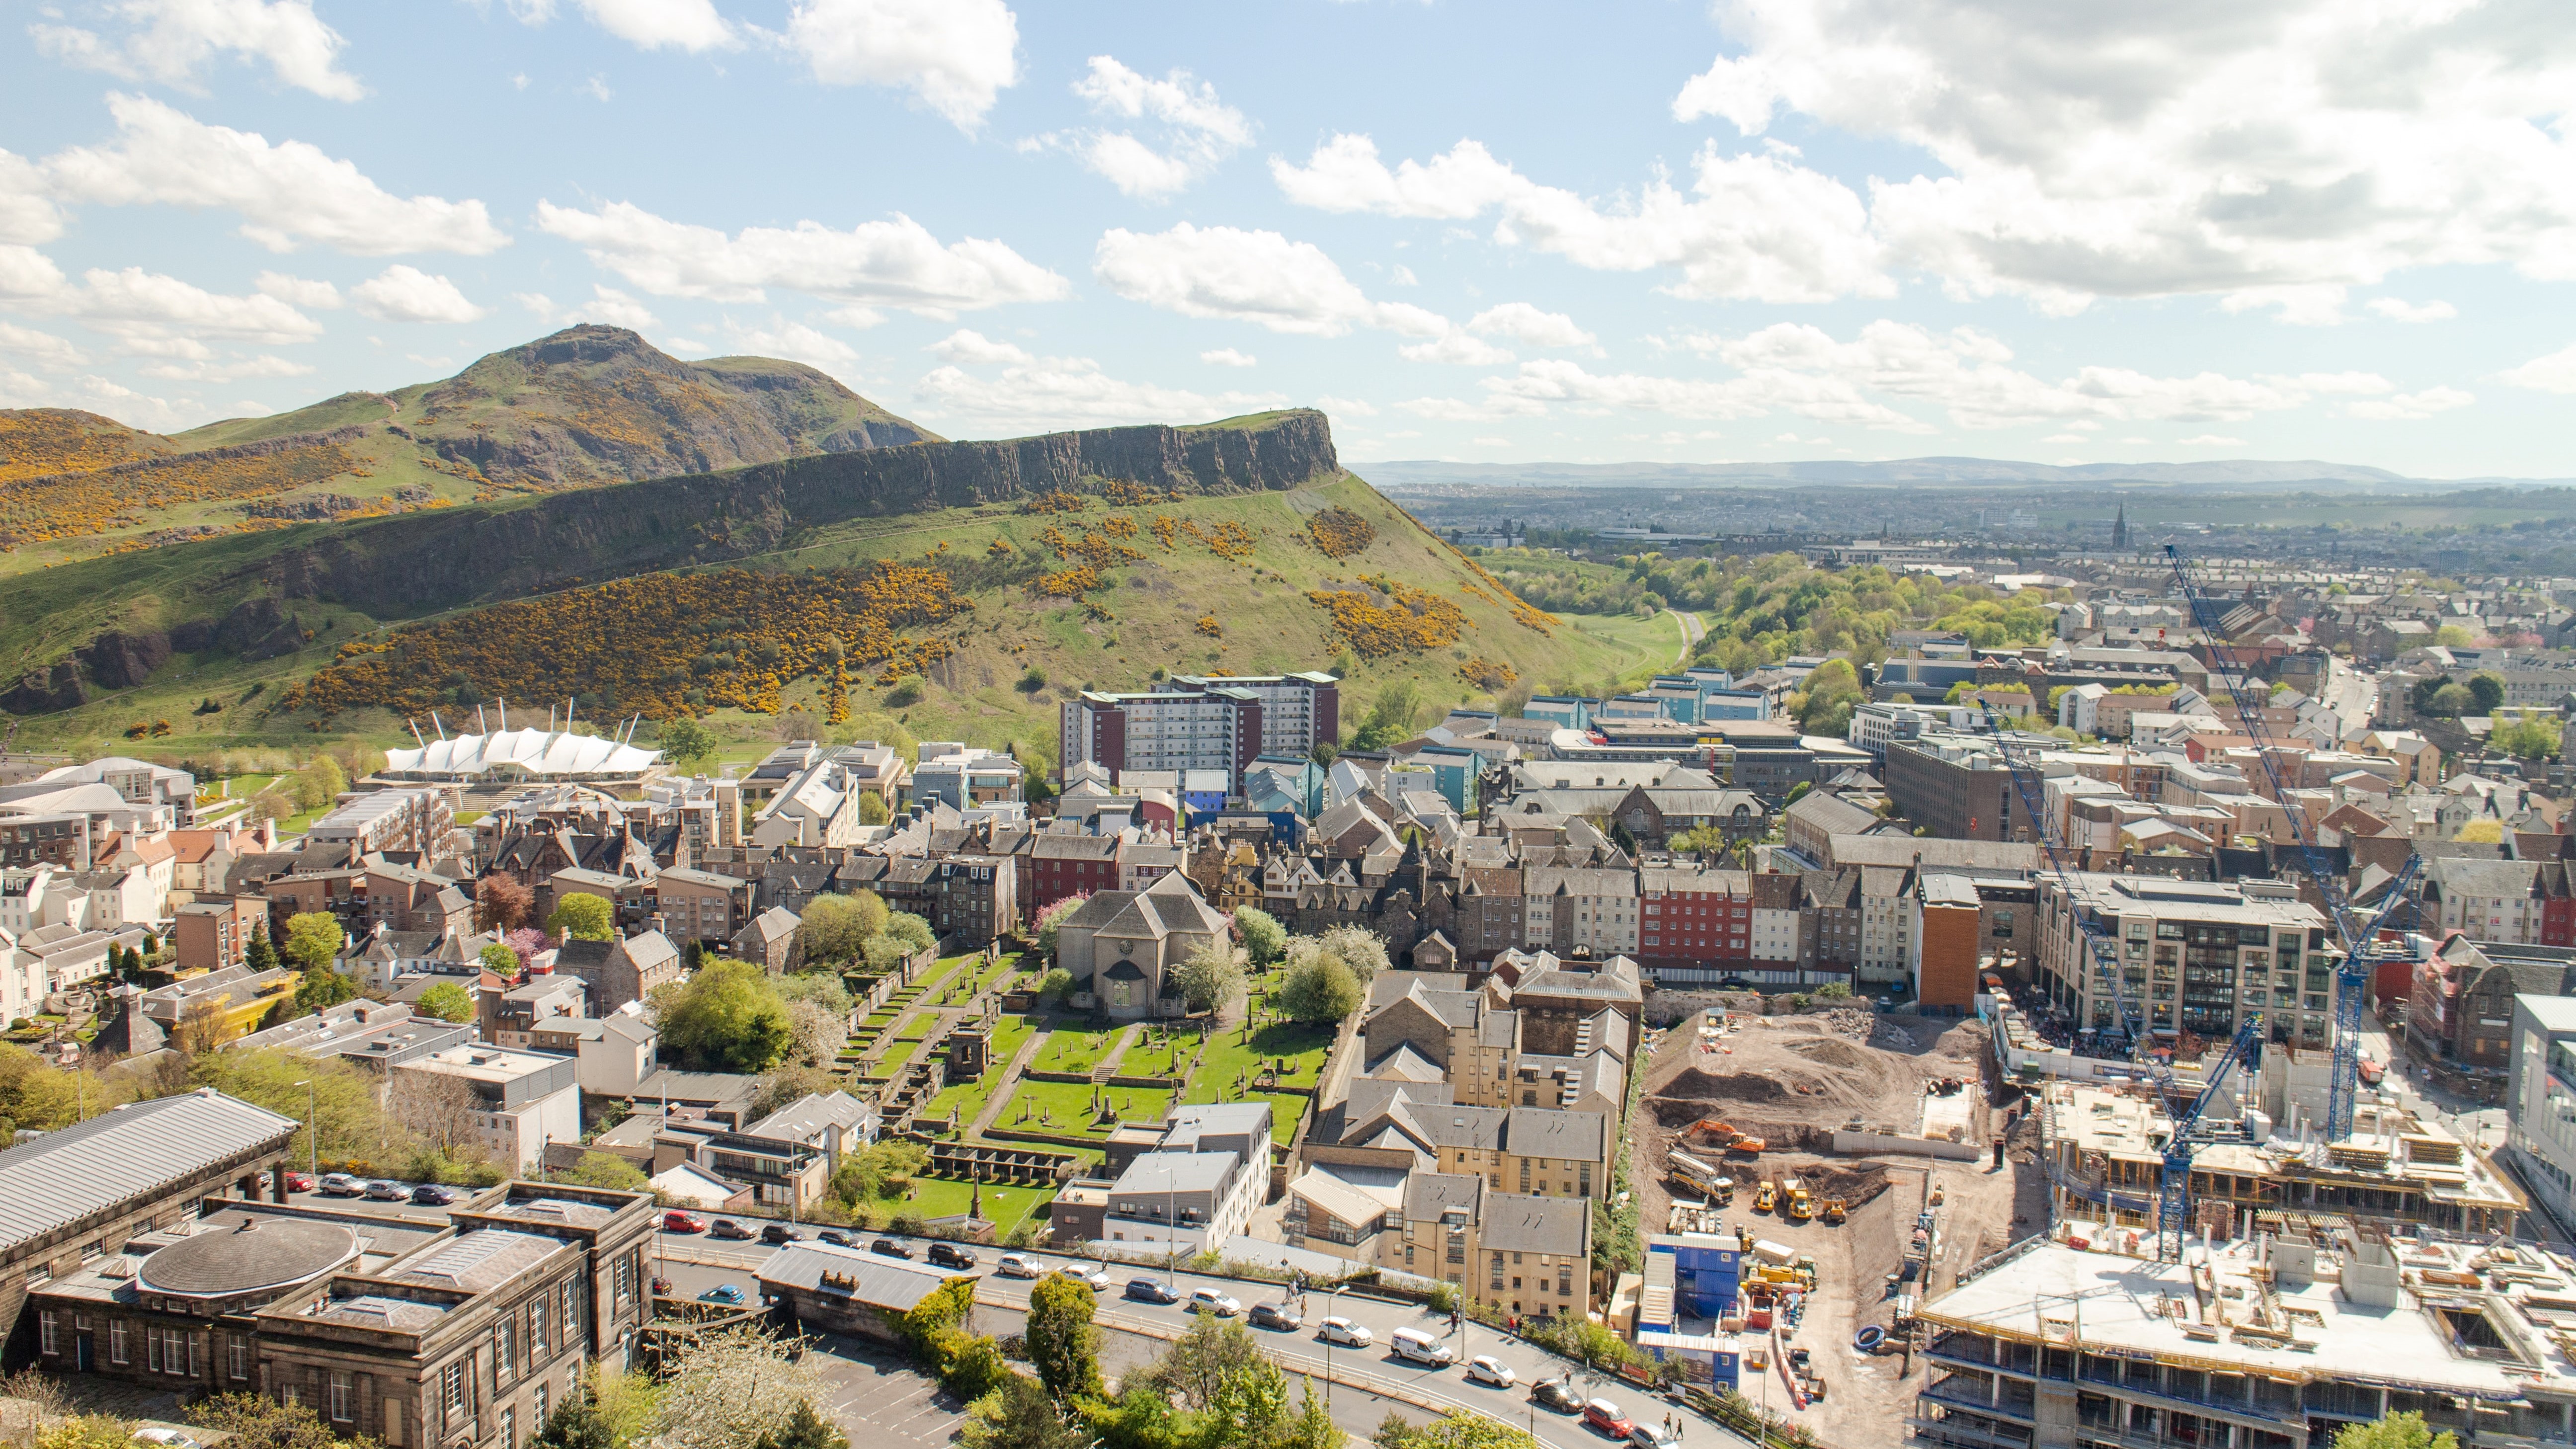 View of Arthur's Seat and Edinburgh city from above